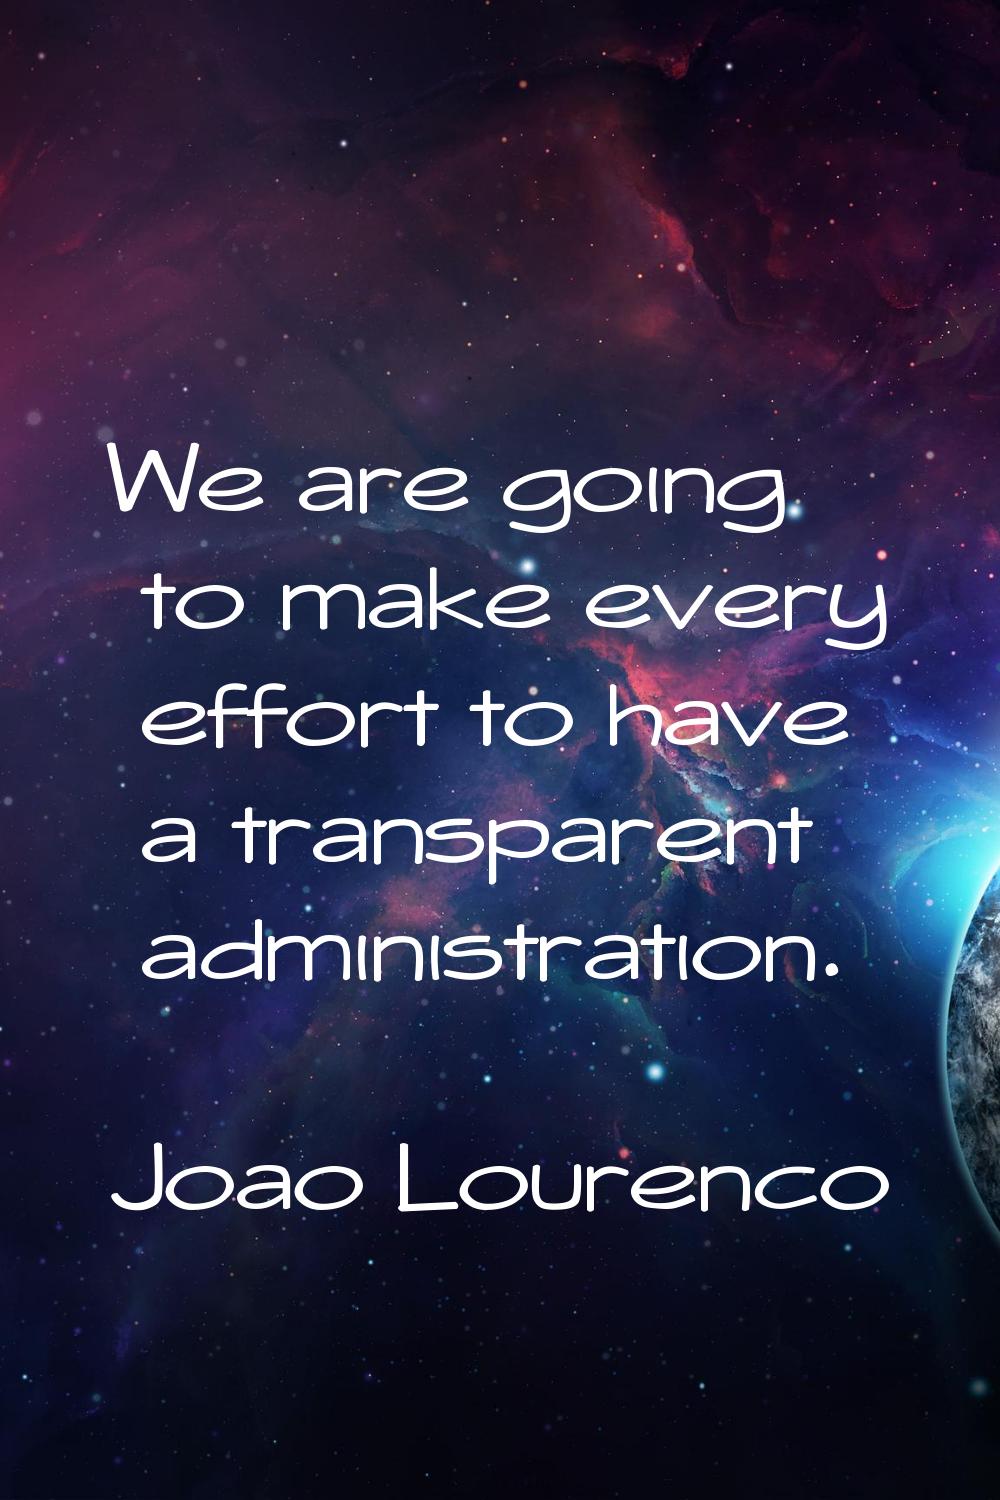 We are going to make every effort to have a transparent administration.